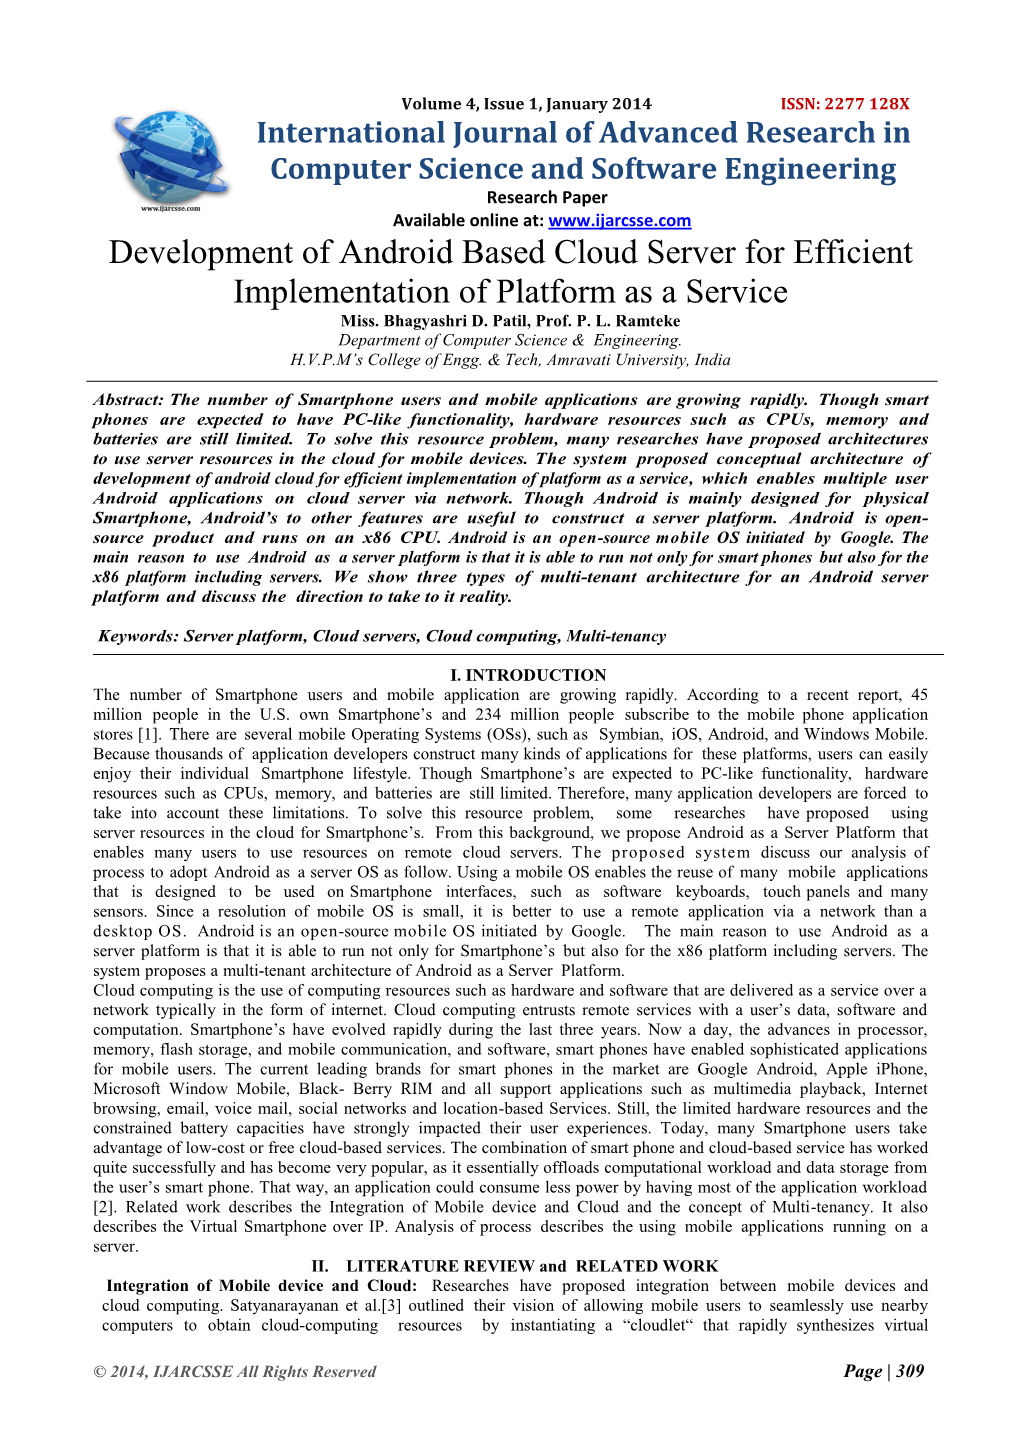 Development of Android Based Cloud Server for Efficient Implementation of Platform As a Service Miss